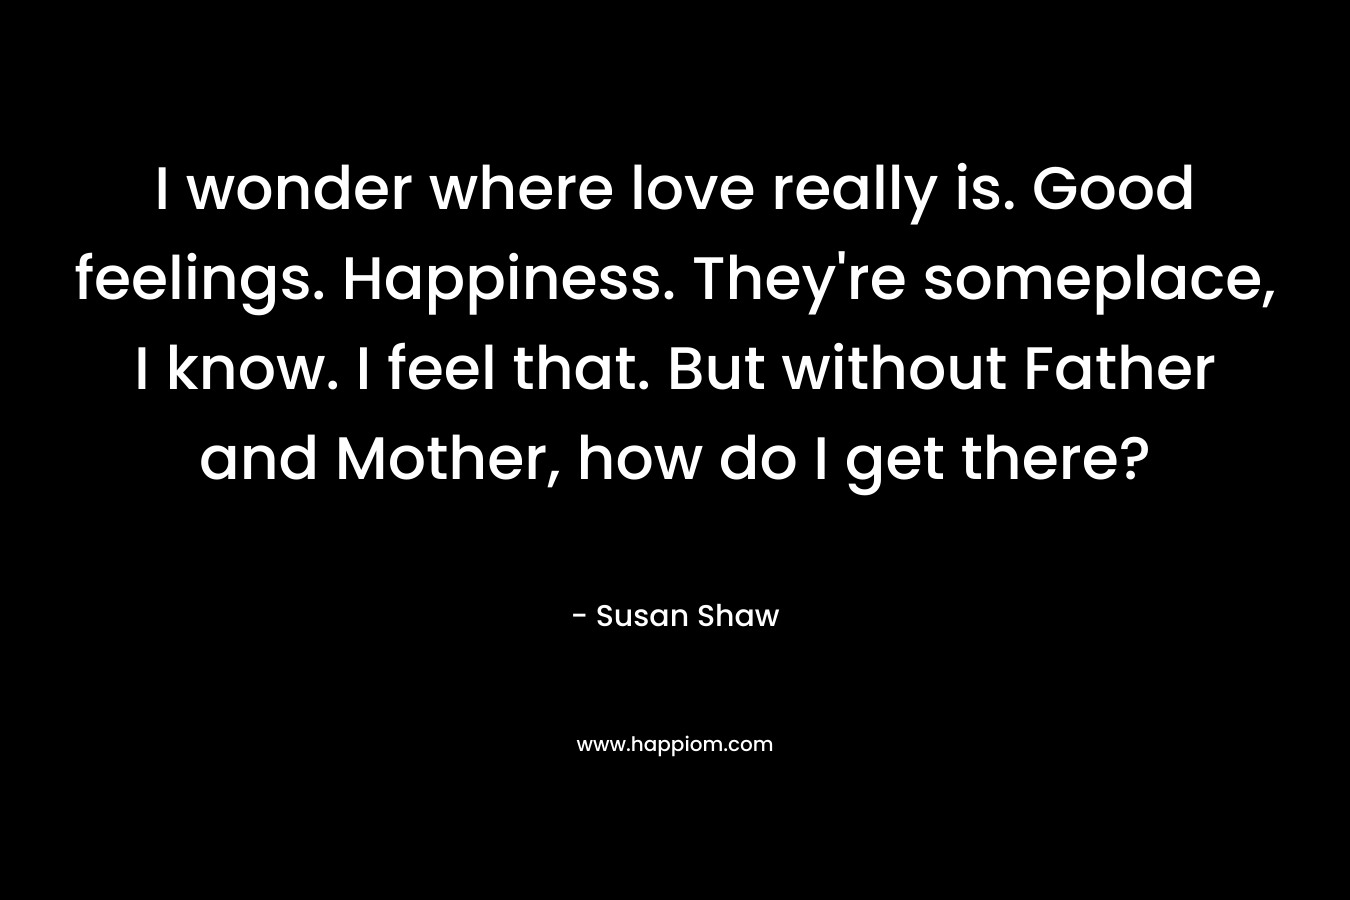 I wonder where love really is. Good feelings. Happiness. They’re someplace, I know. I feel that. But without Father and Mother, how do I get there? – Susan Shaw